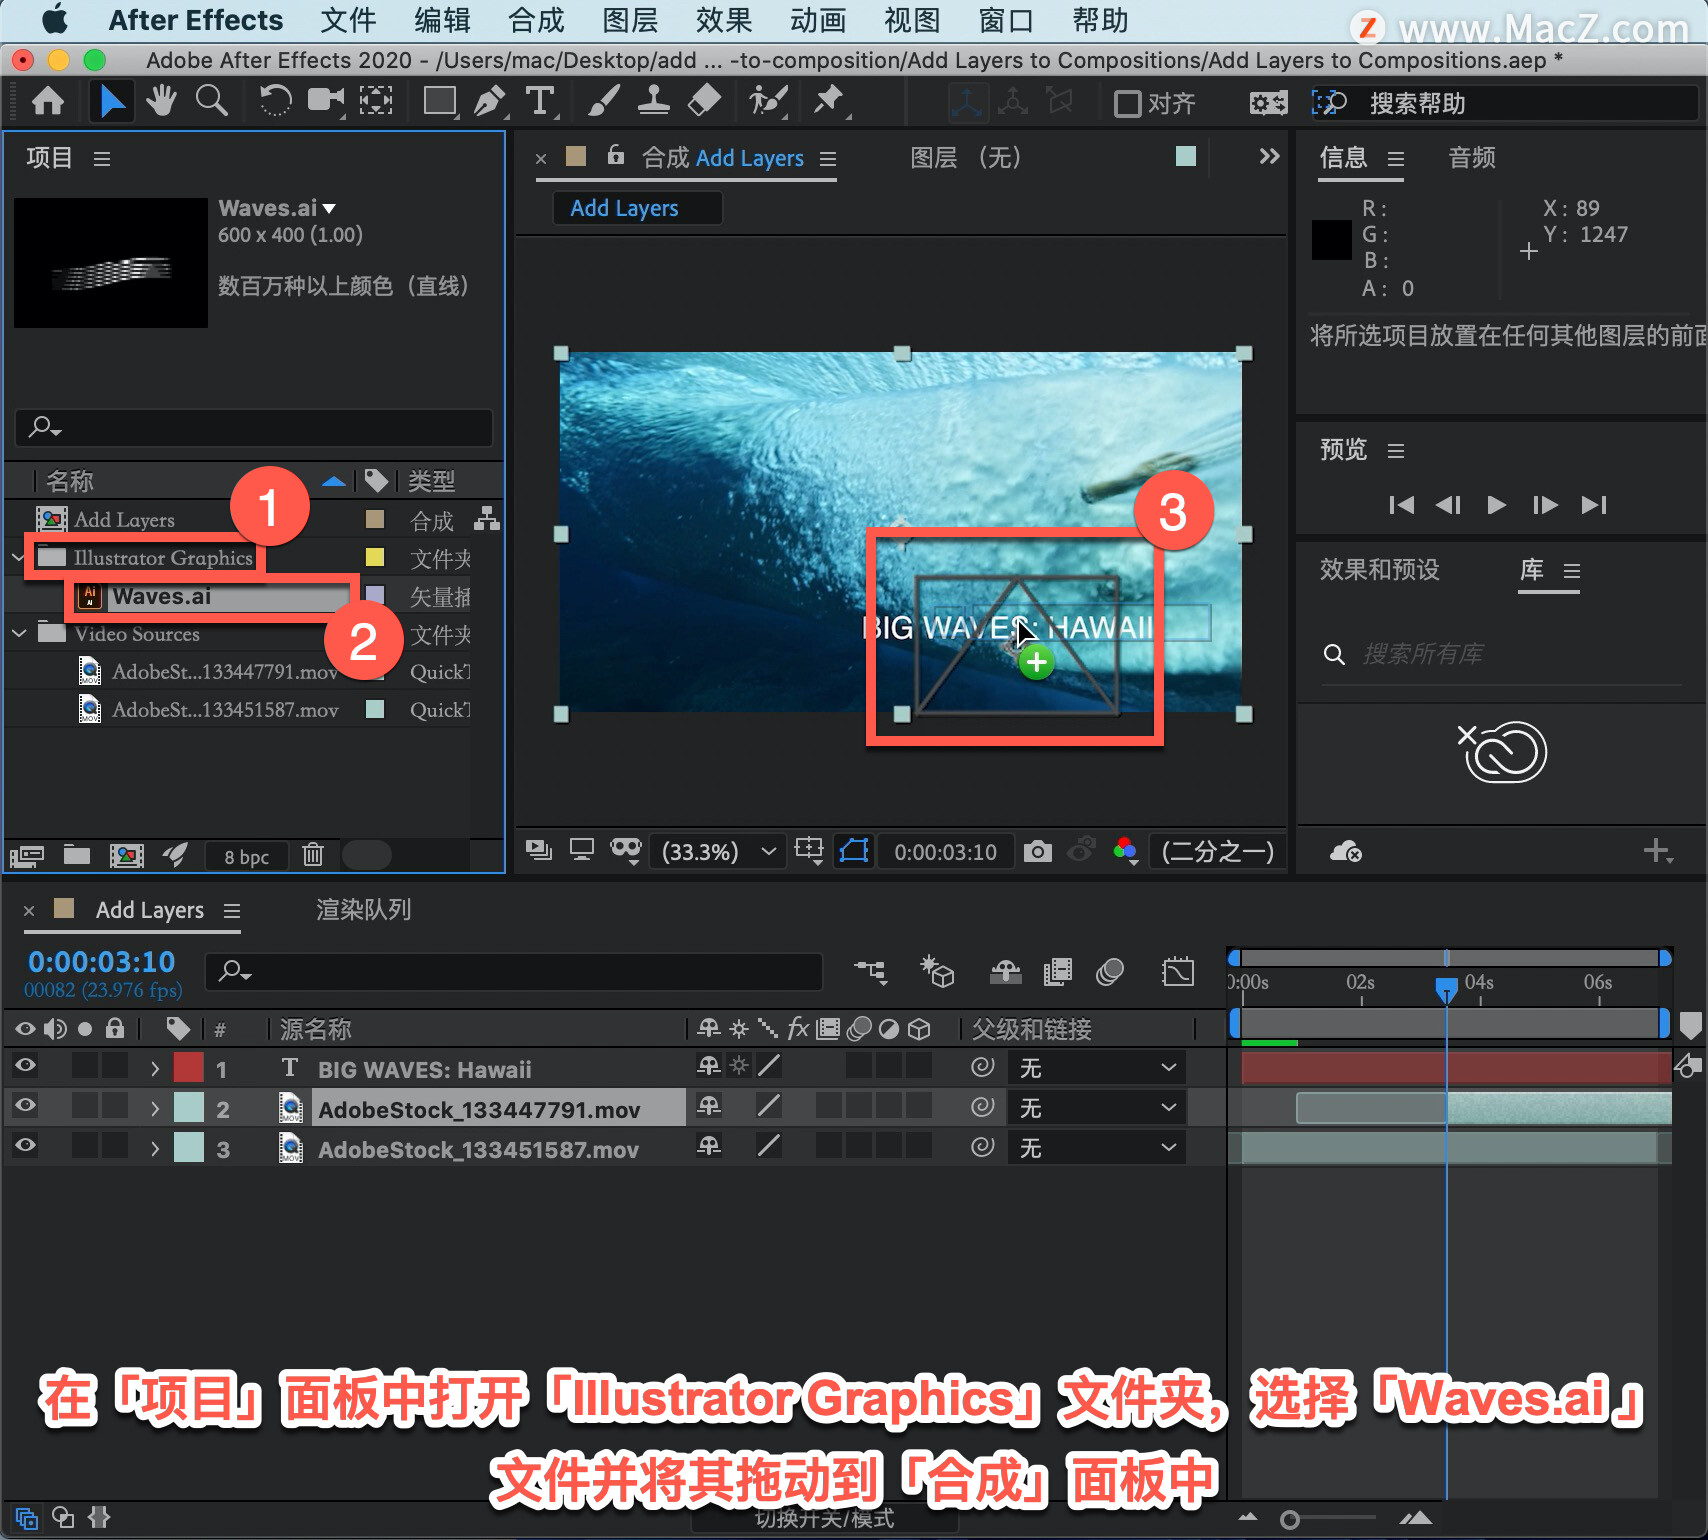 After Effects 教程「64」，如何在 After Effects 中栅格化、扭曲图层？